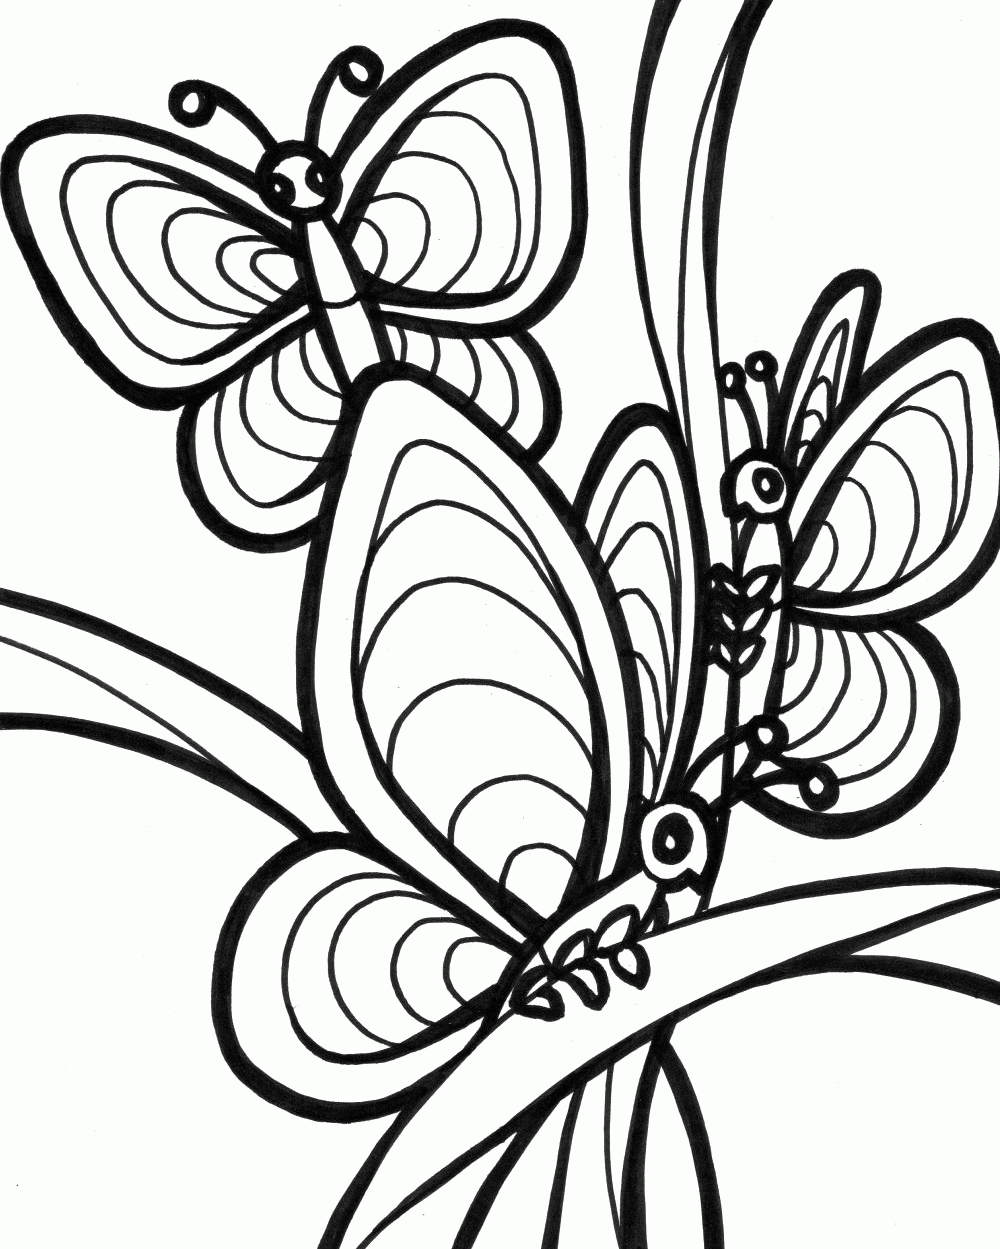 Beautiful Butterflies Coloring Pages - Here you can find numerous